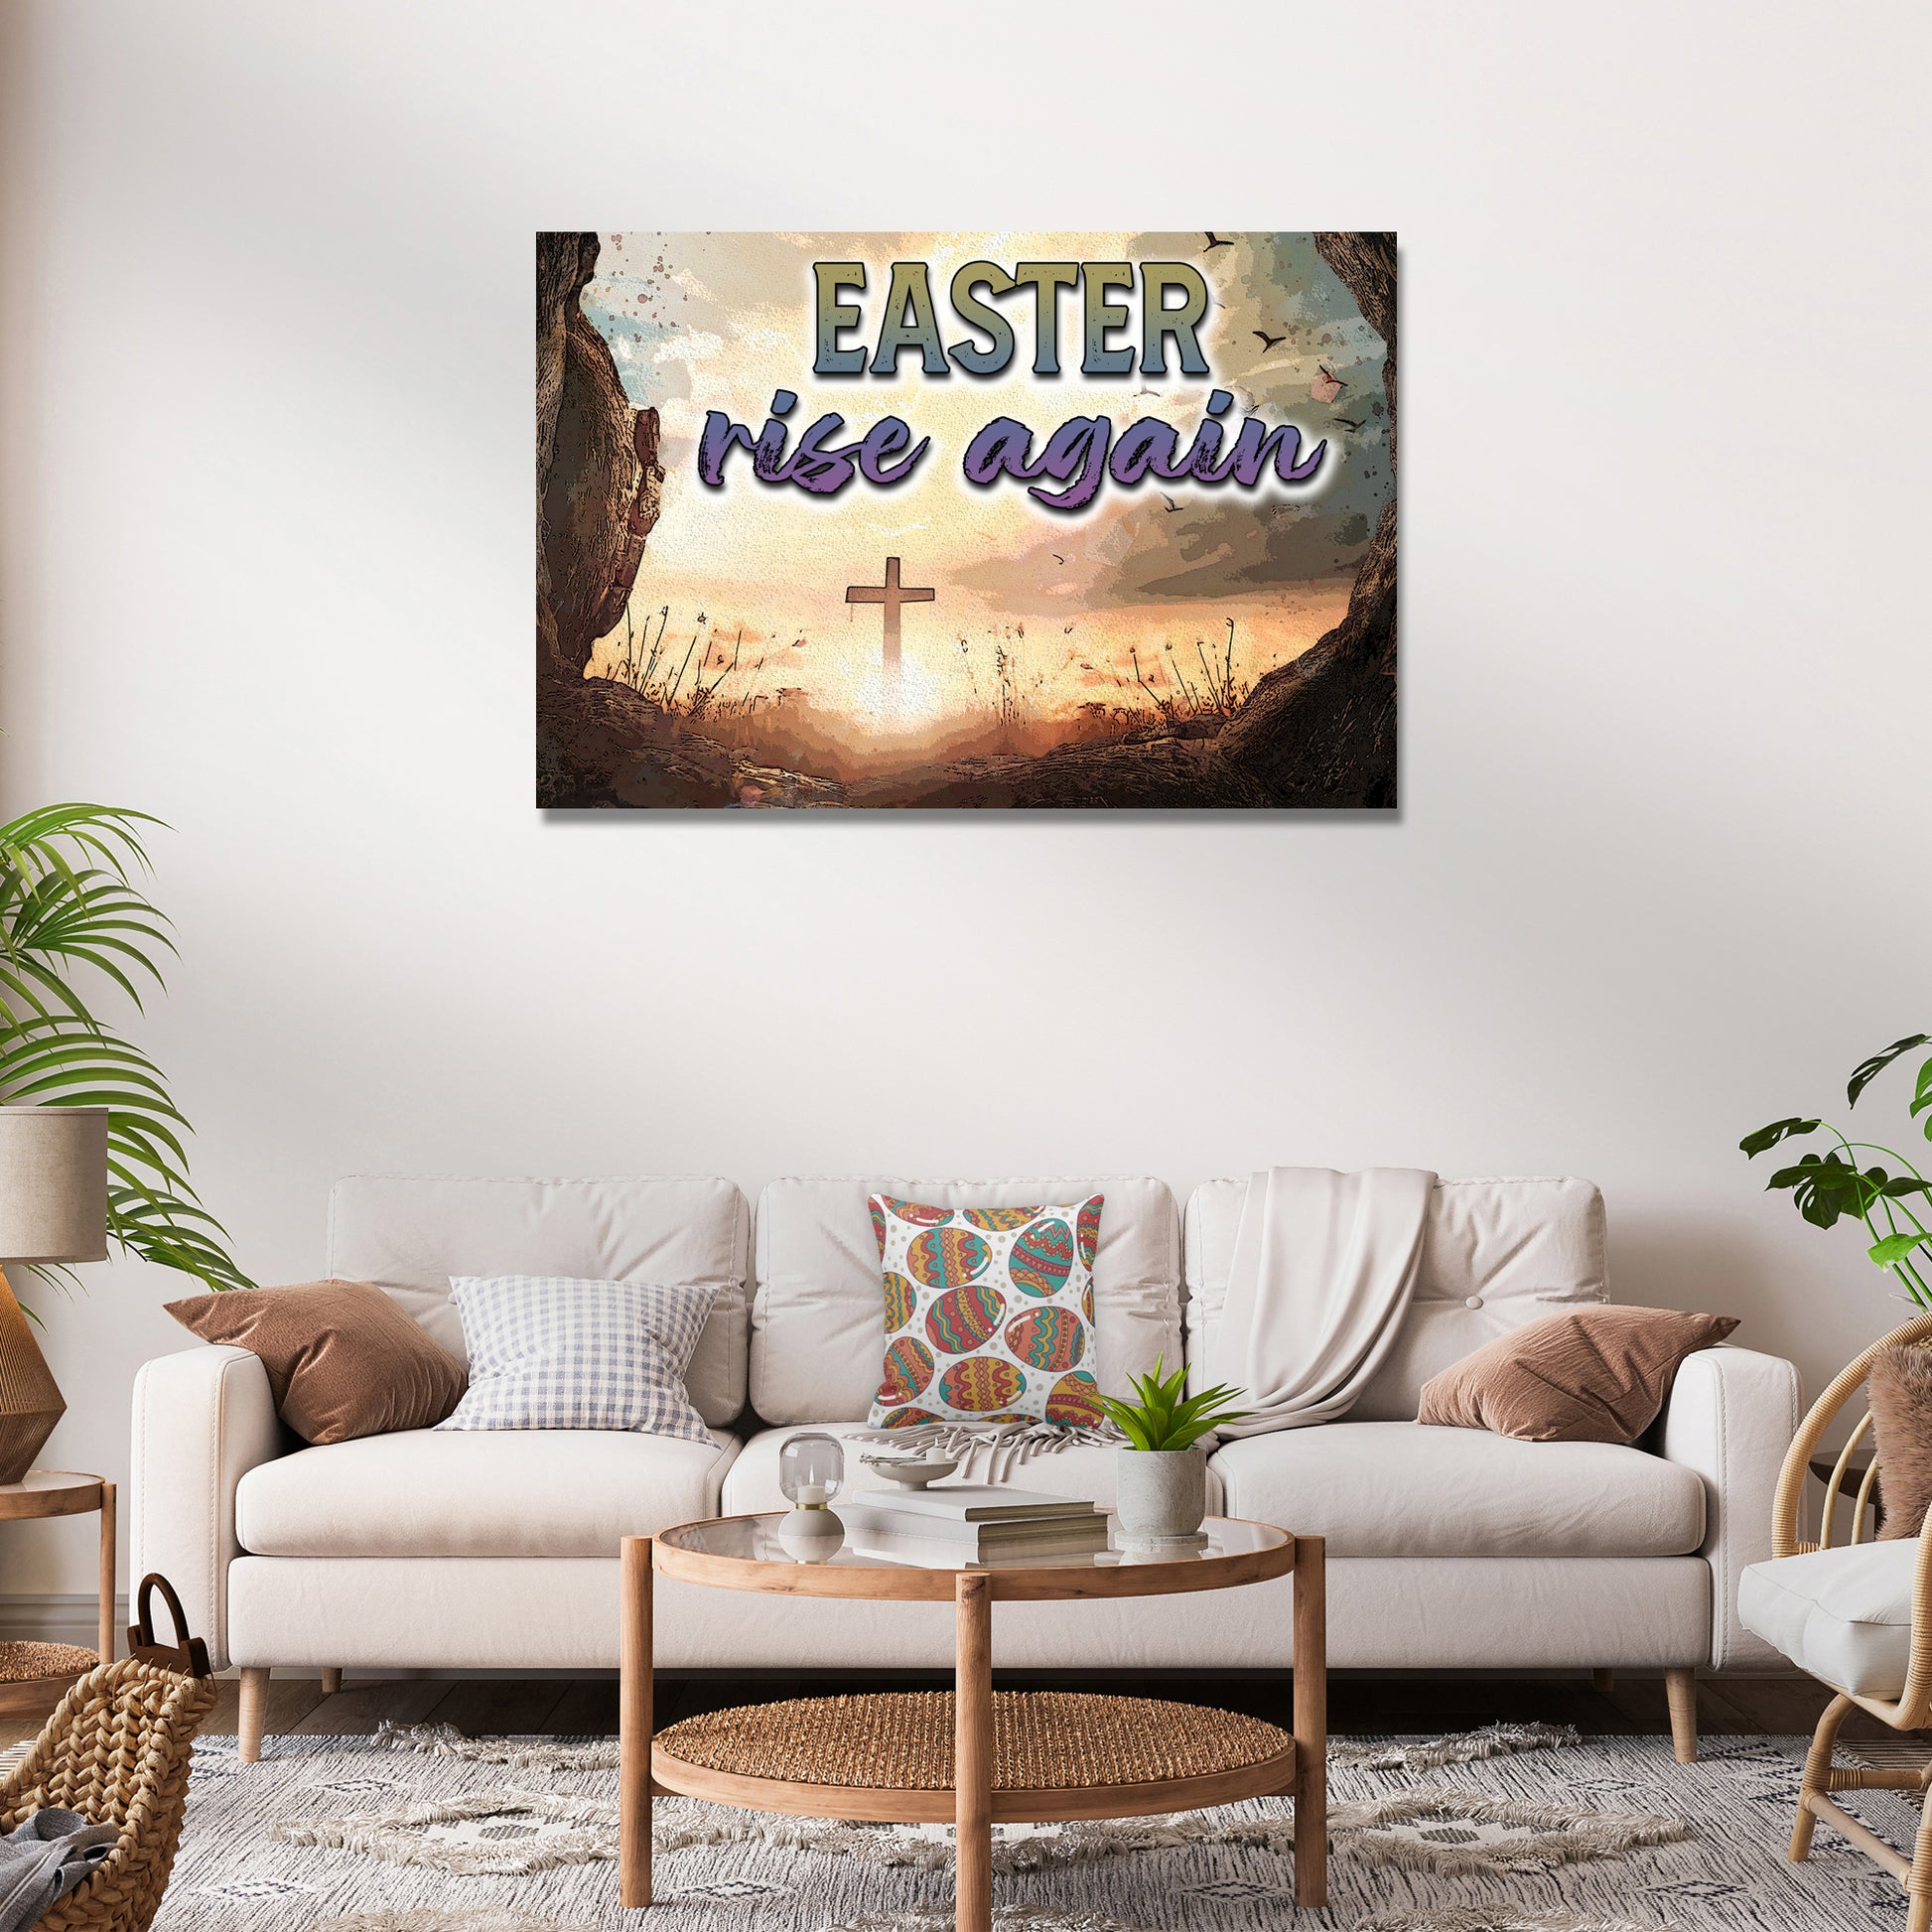 Easter Rise Again Sign - Image by Tailored Canvases